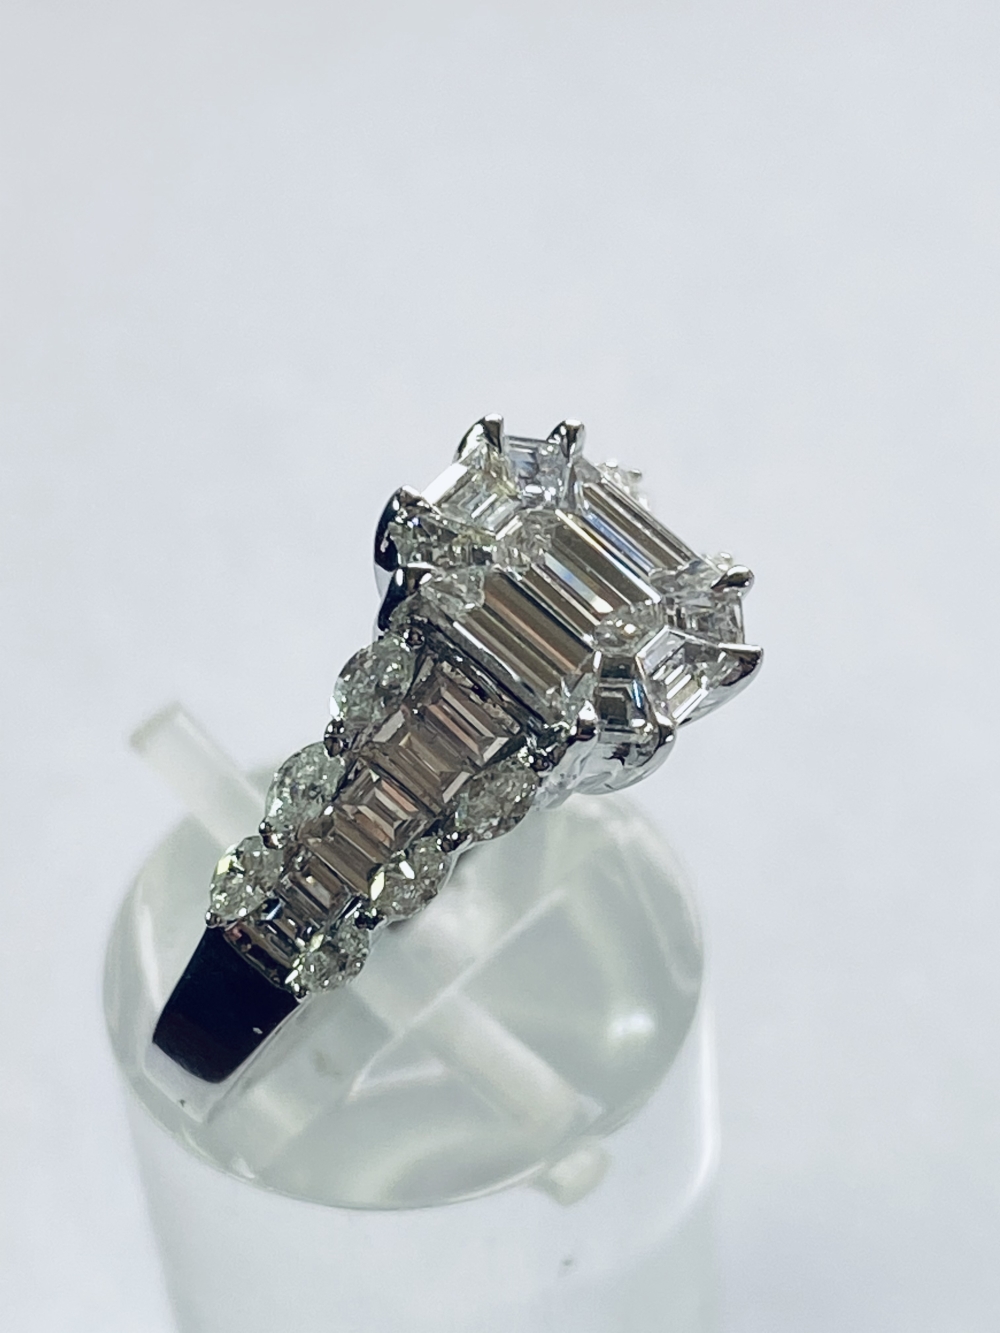 A STUNNING 18CT WHITE GOLD BAGUETTE DIAMOND RING, the baguettes are complimented by marquise diamond - Image 4 of 7